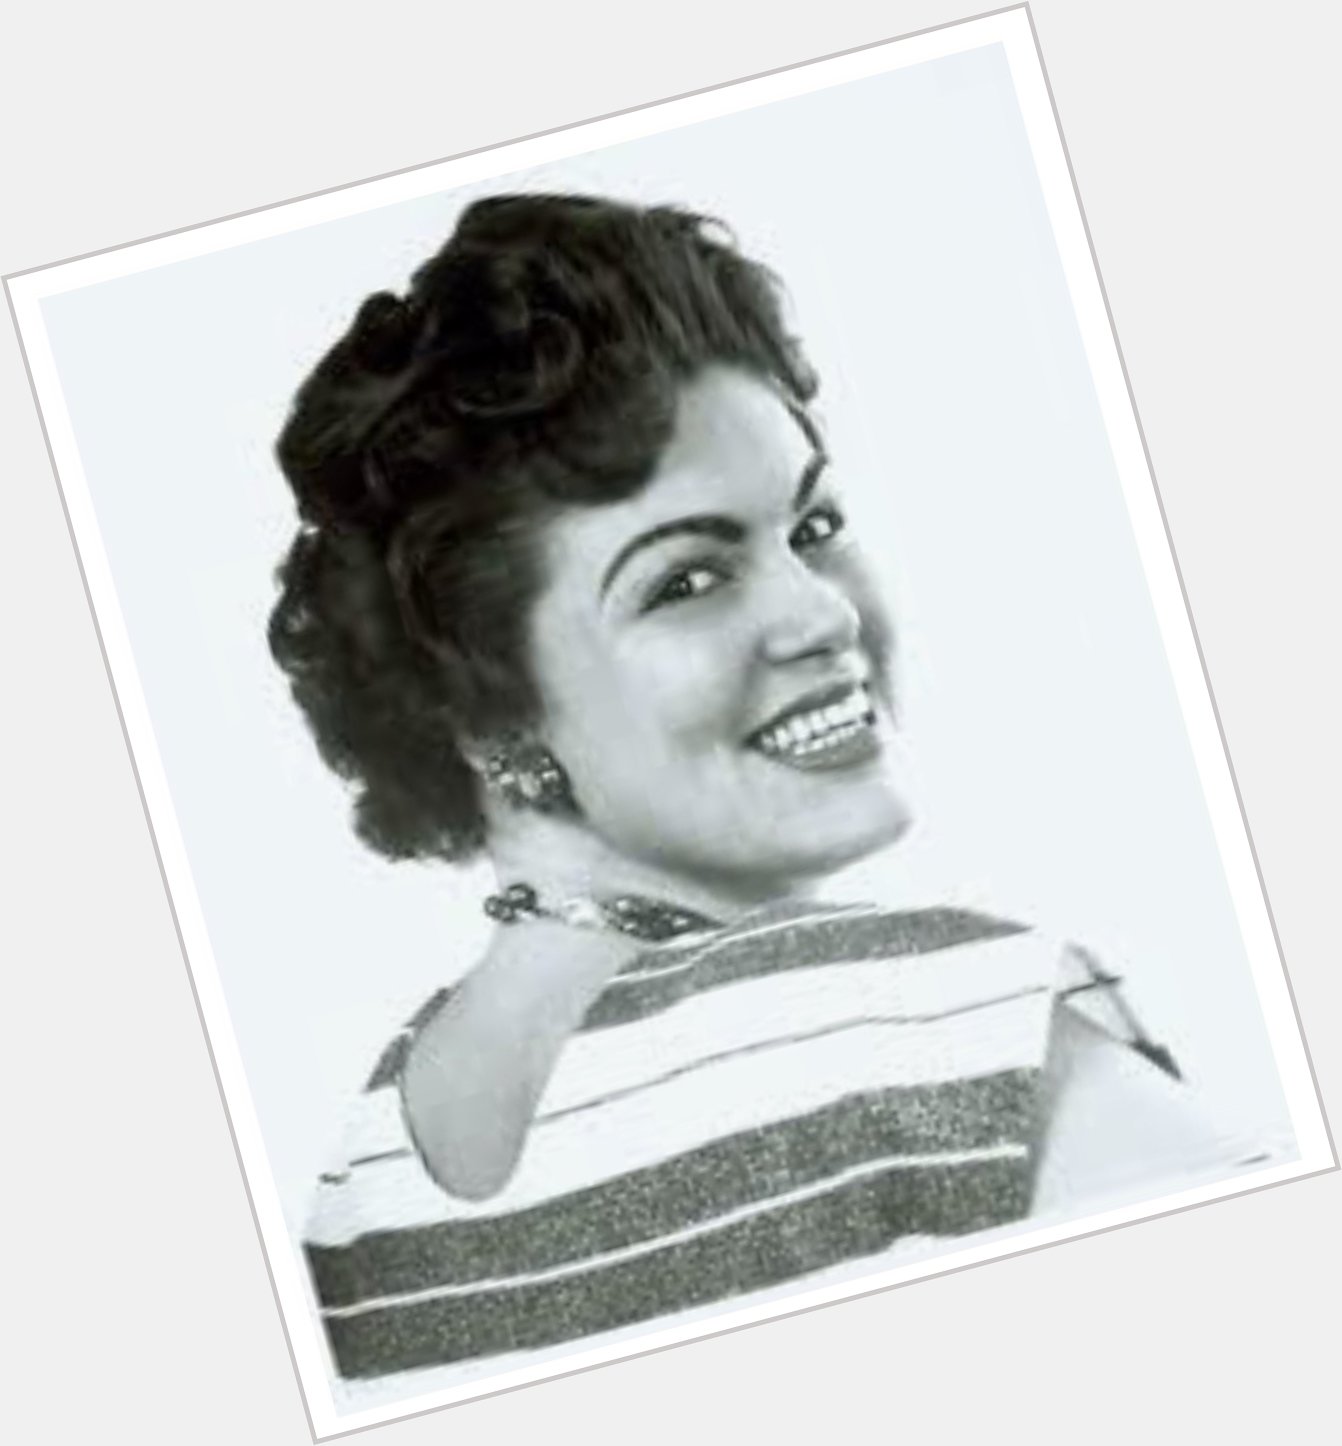 Happy birthday, Patsy Cline. You continue to inspire this 